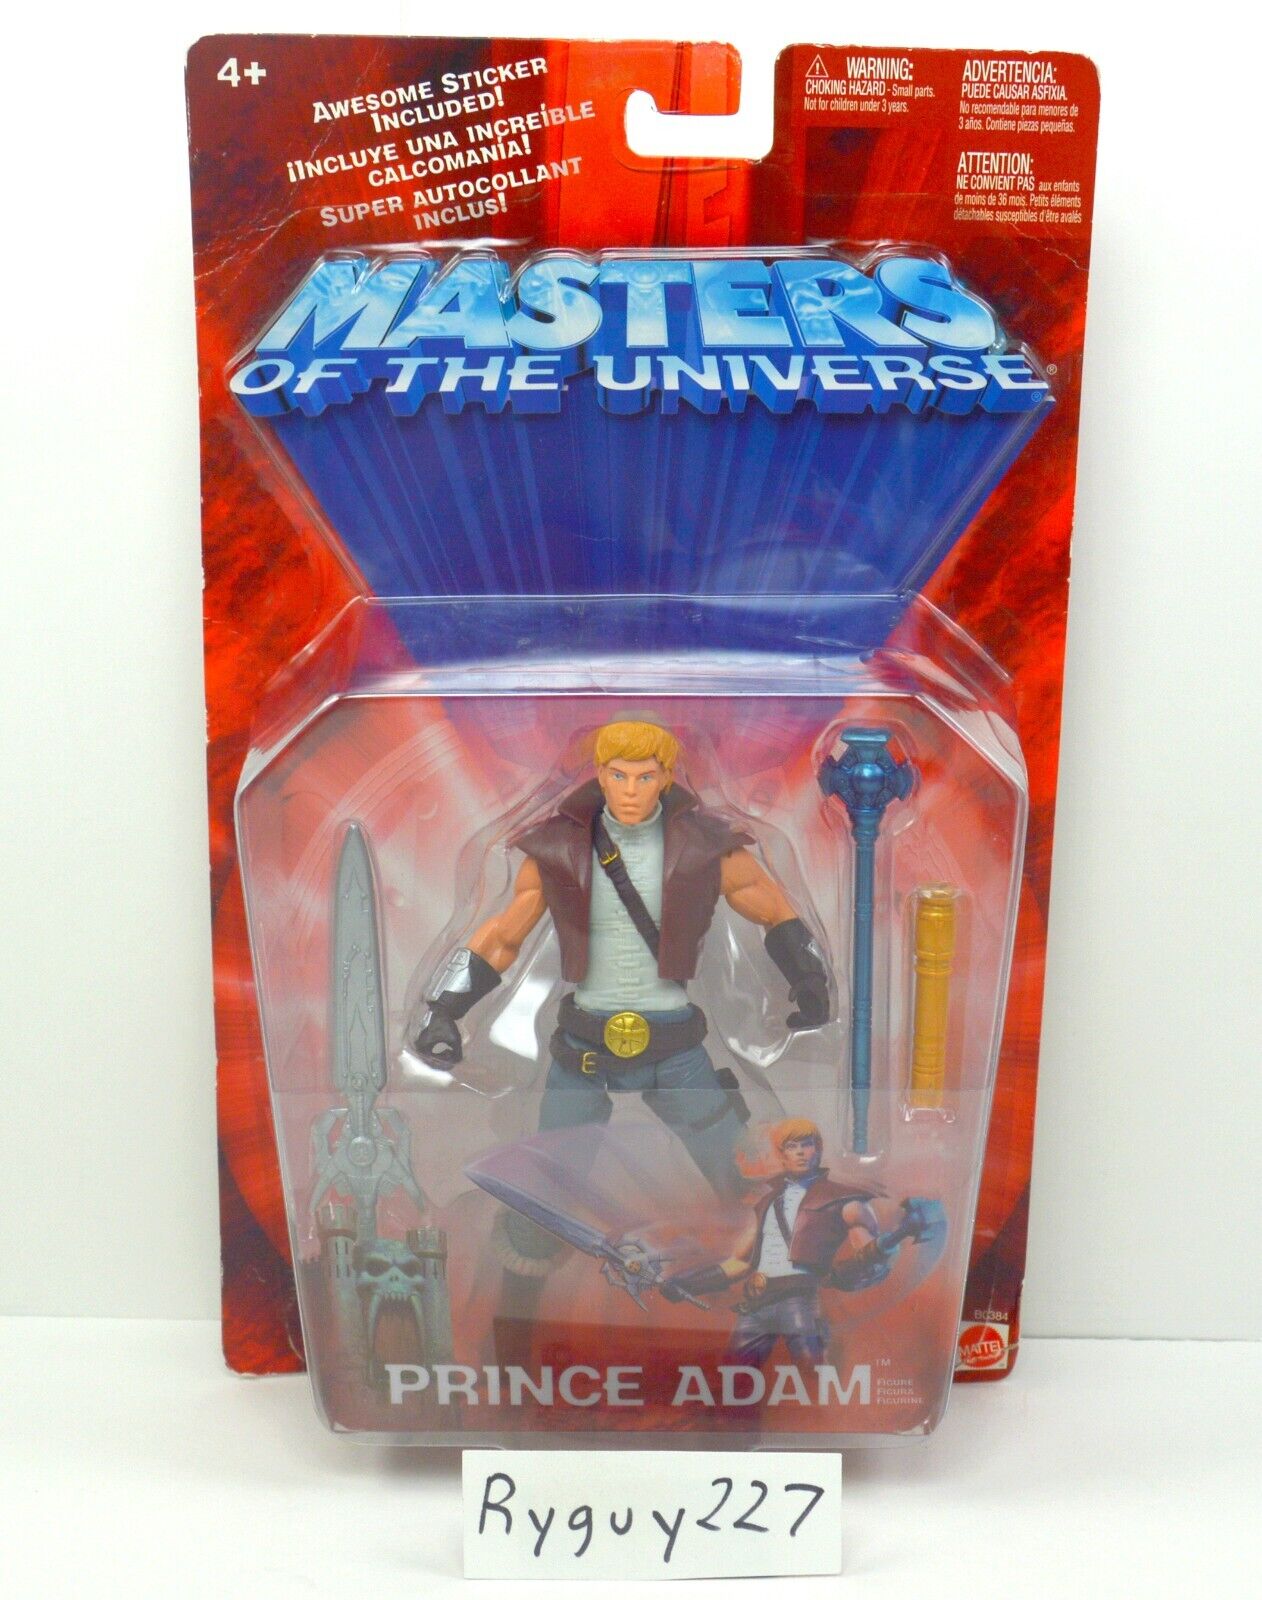 MOTU, Prince Adam, 200x, Masters of the Universe, MOC, carded, sealed, figure